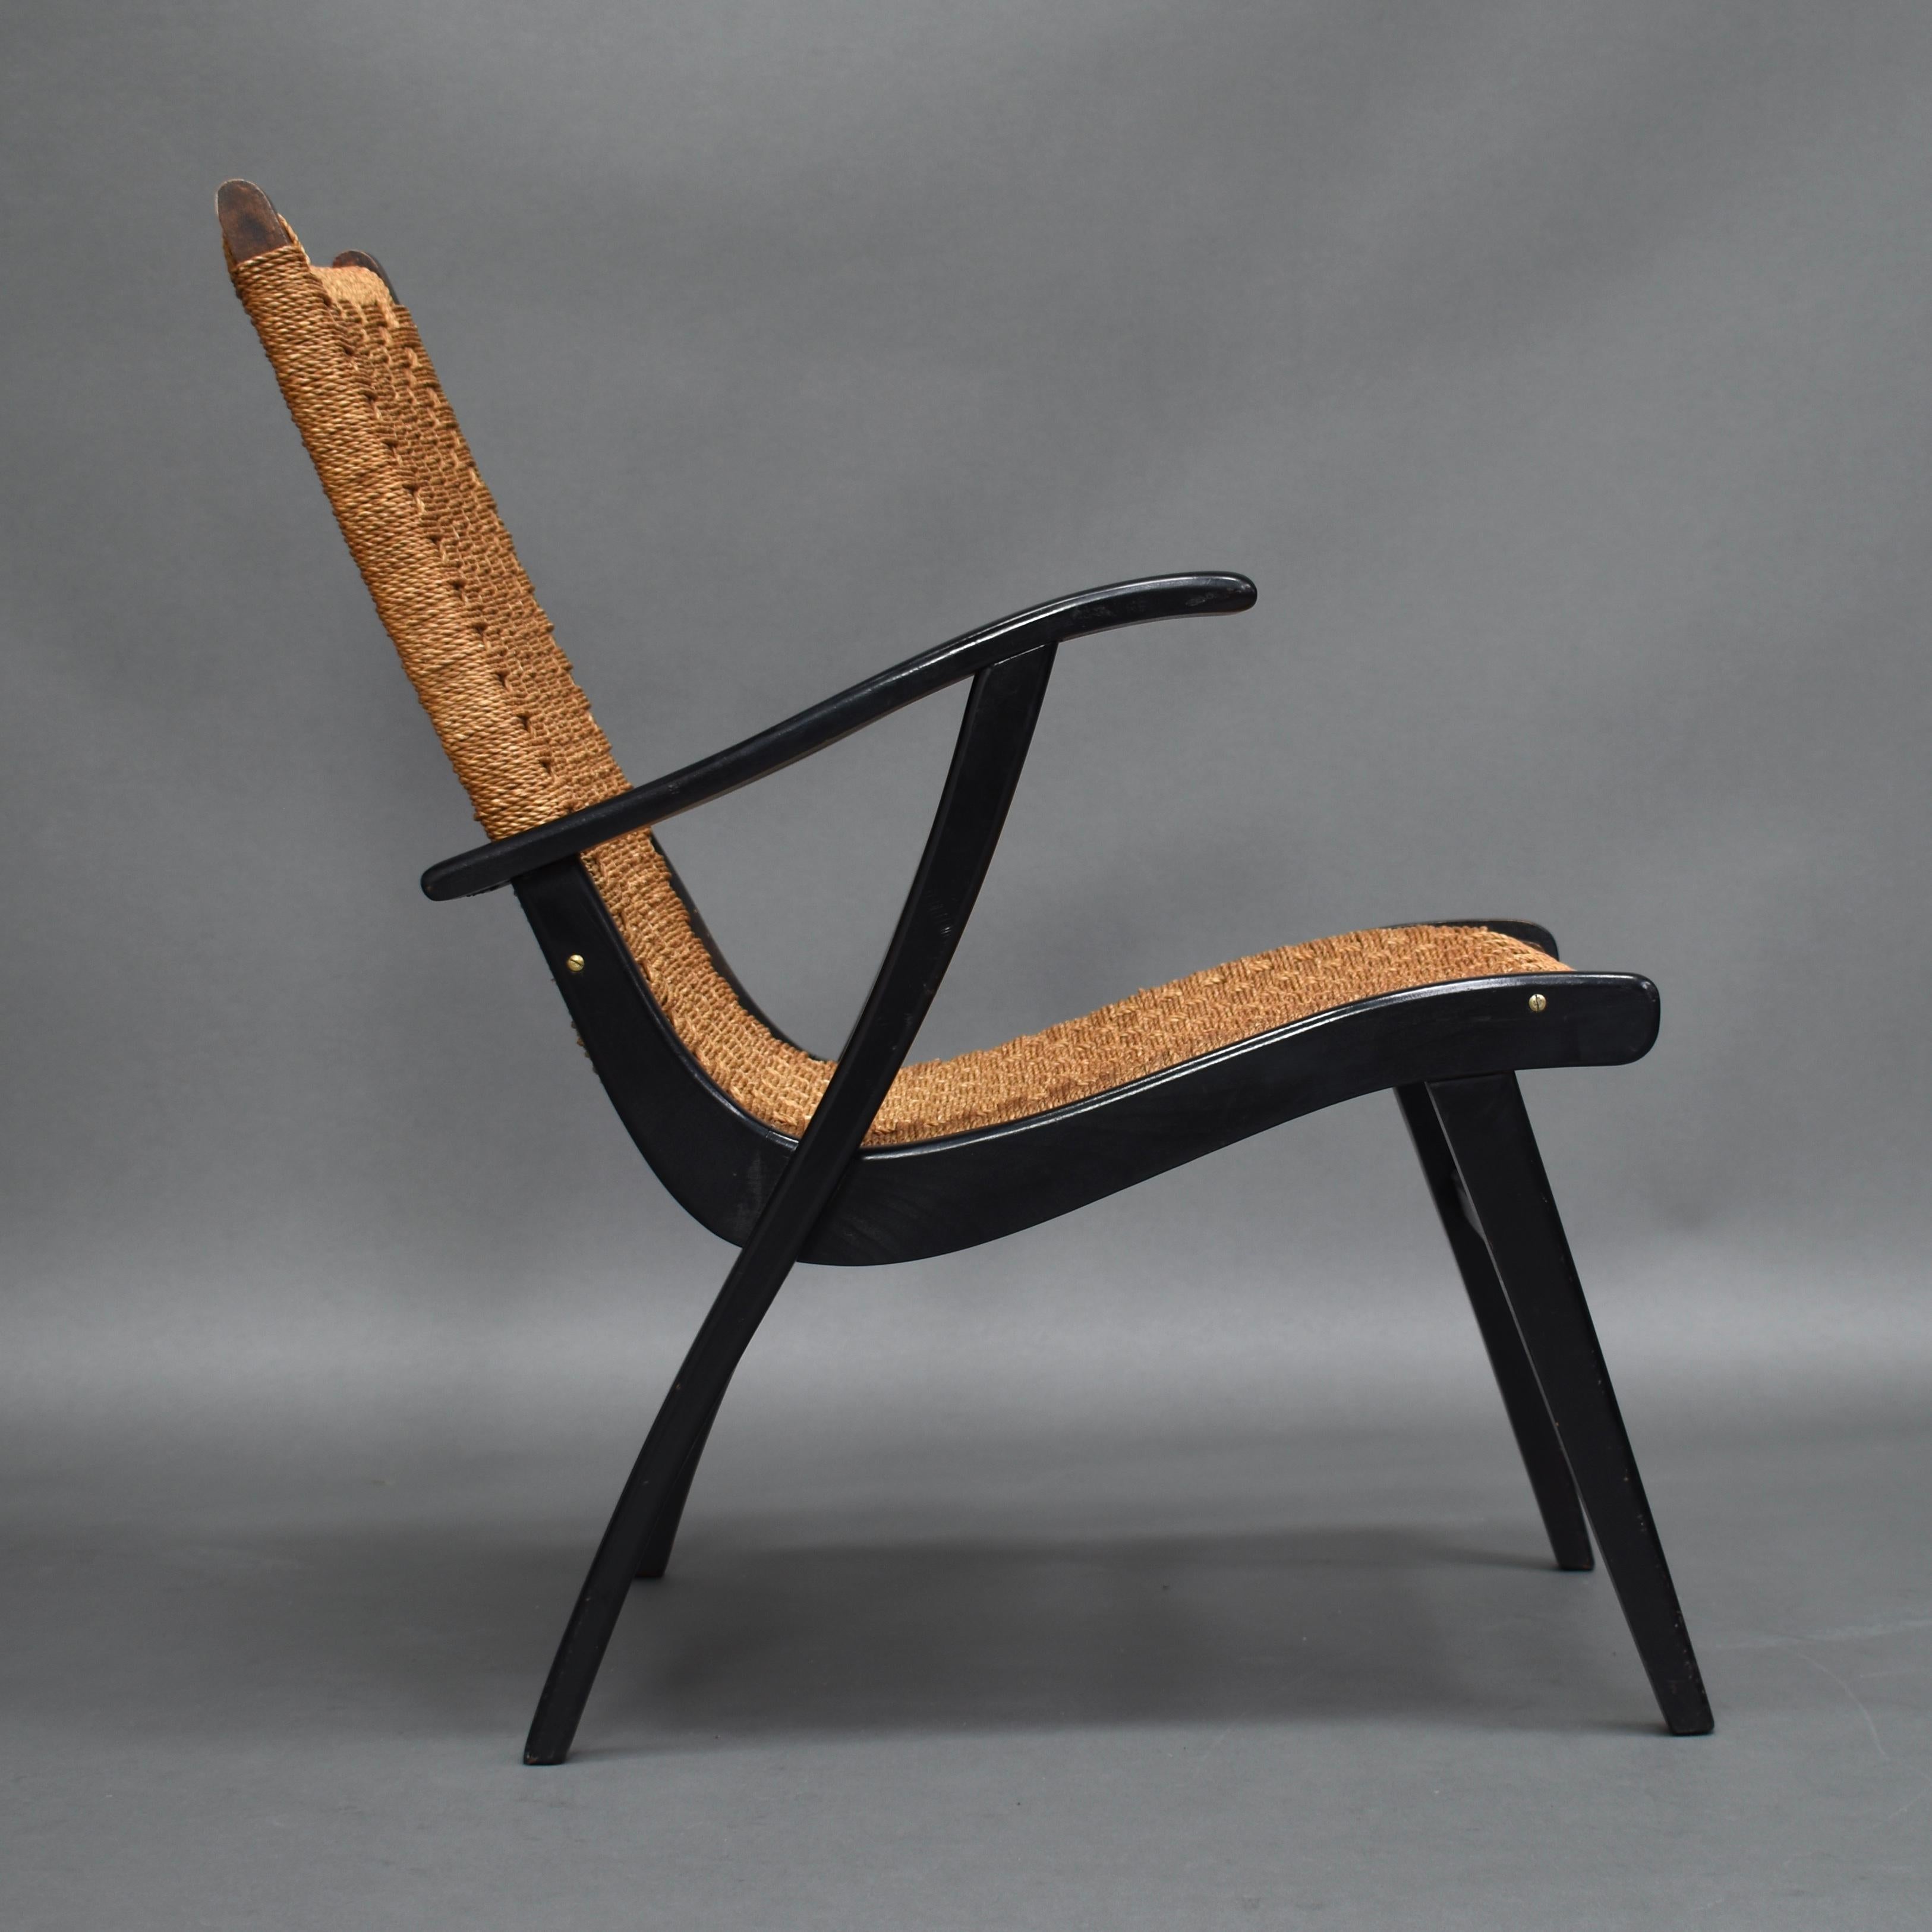 Midcentury lounge chair by the former Dutch warehouse Vroom & Dreesman (V&D), Netherlands, 1957.

Designer: Unknown

Manufacturer: Vroom & Dreesman

Country: Netherlands

Model: Lounge chair

Design period: 1957

Date of manufacturing: